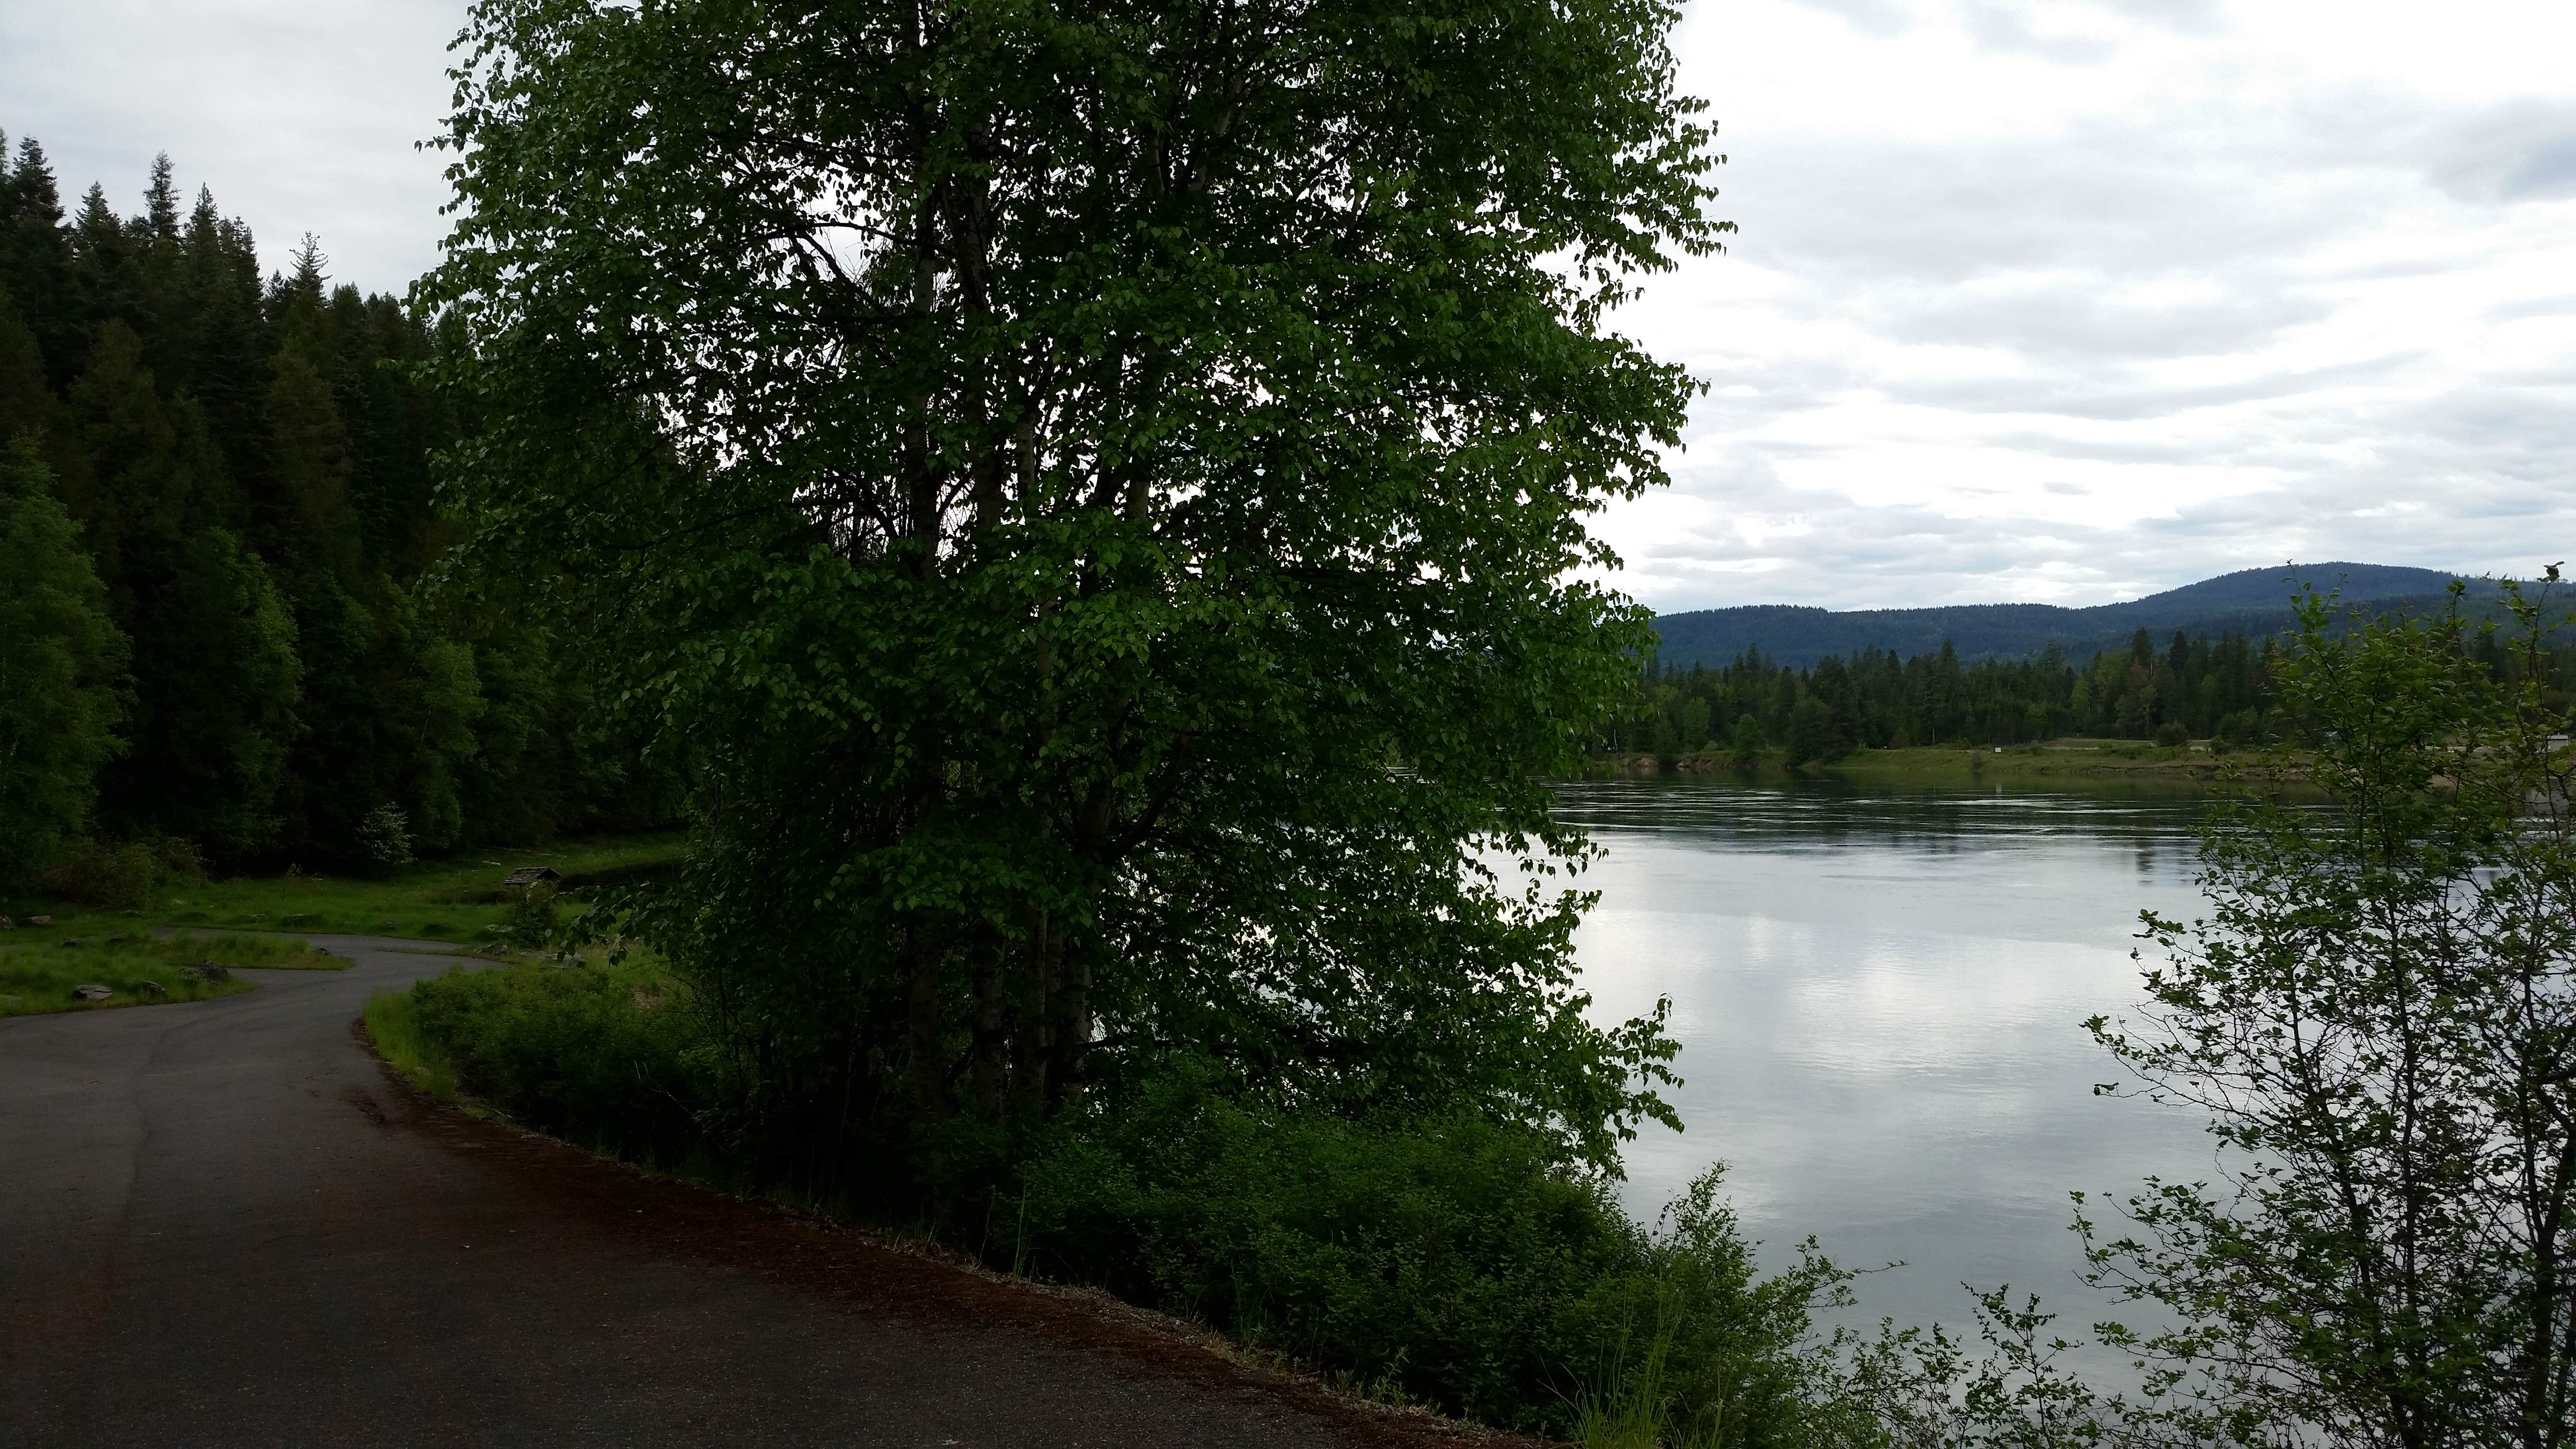 Road to boat launch by the Pend Oreille River